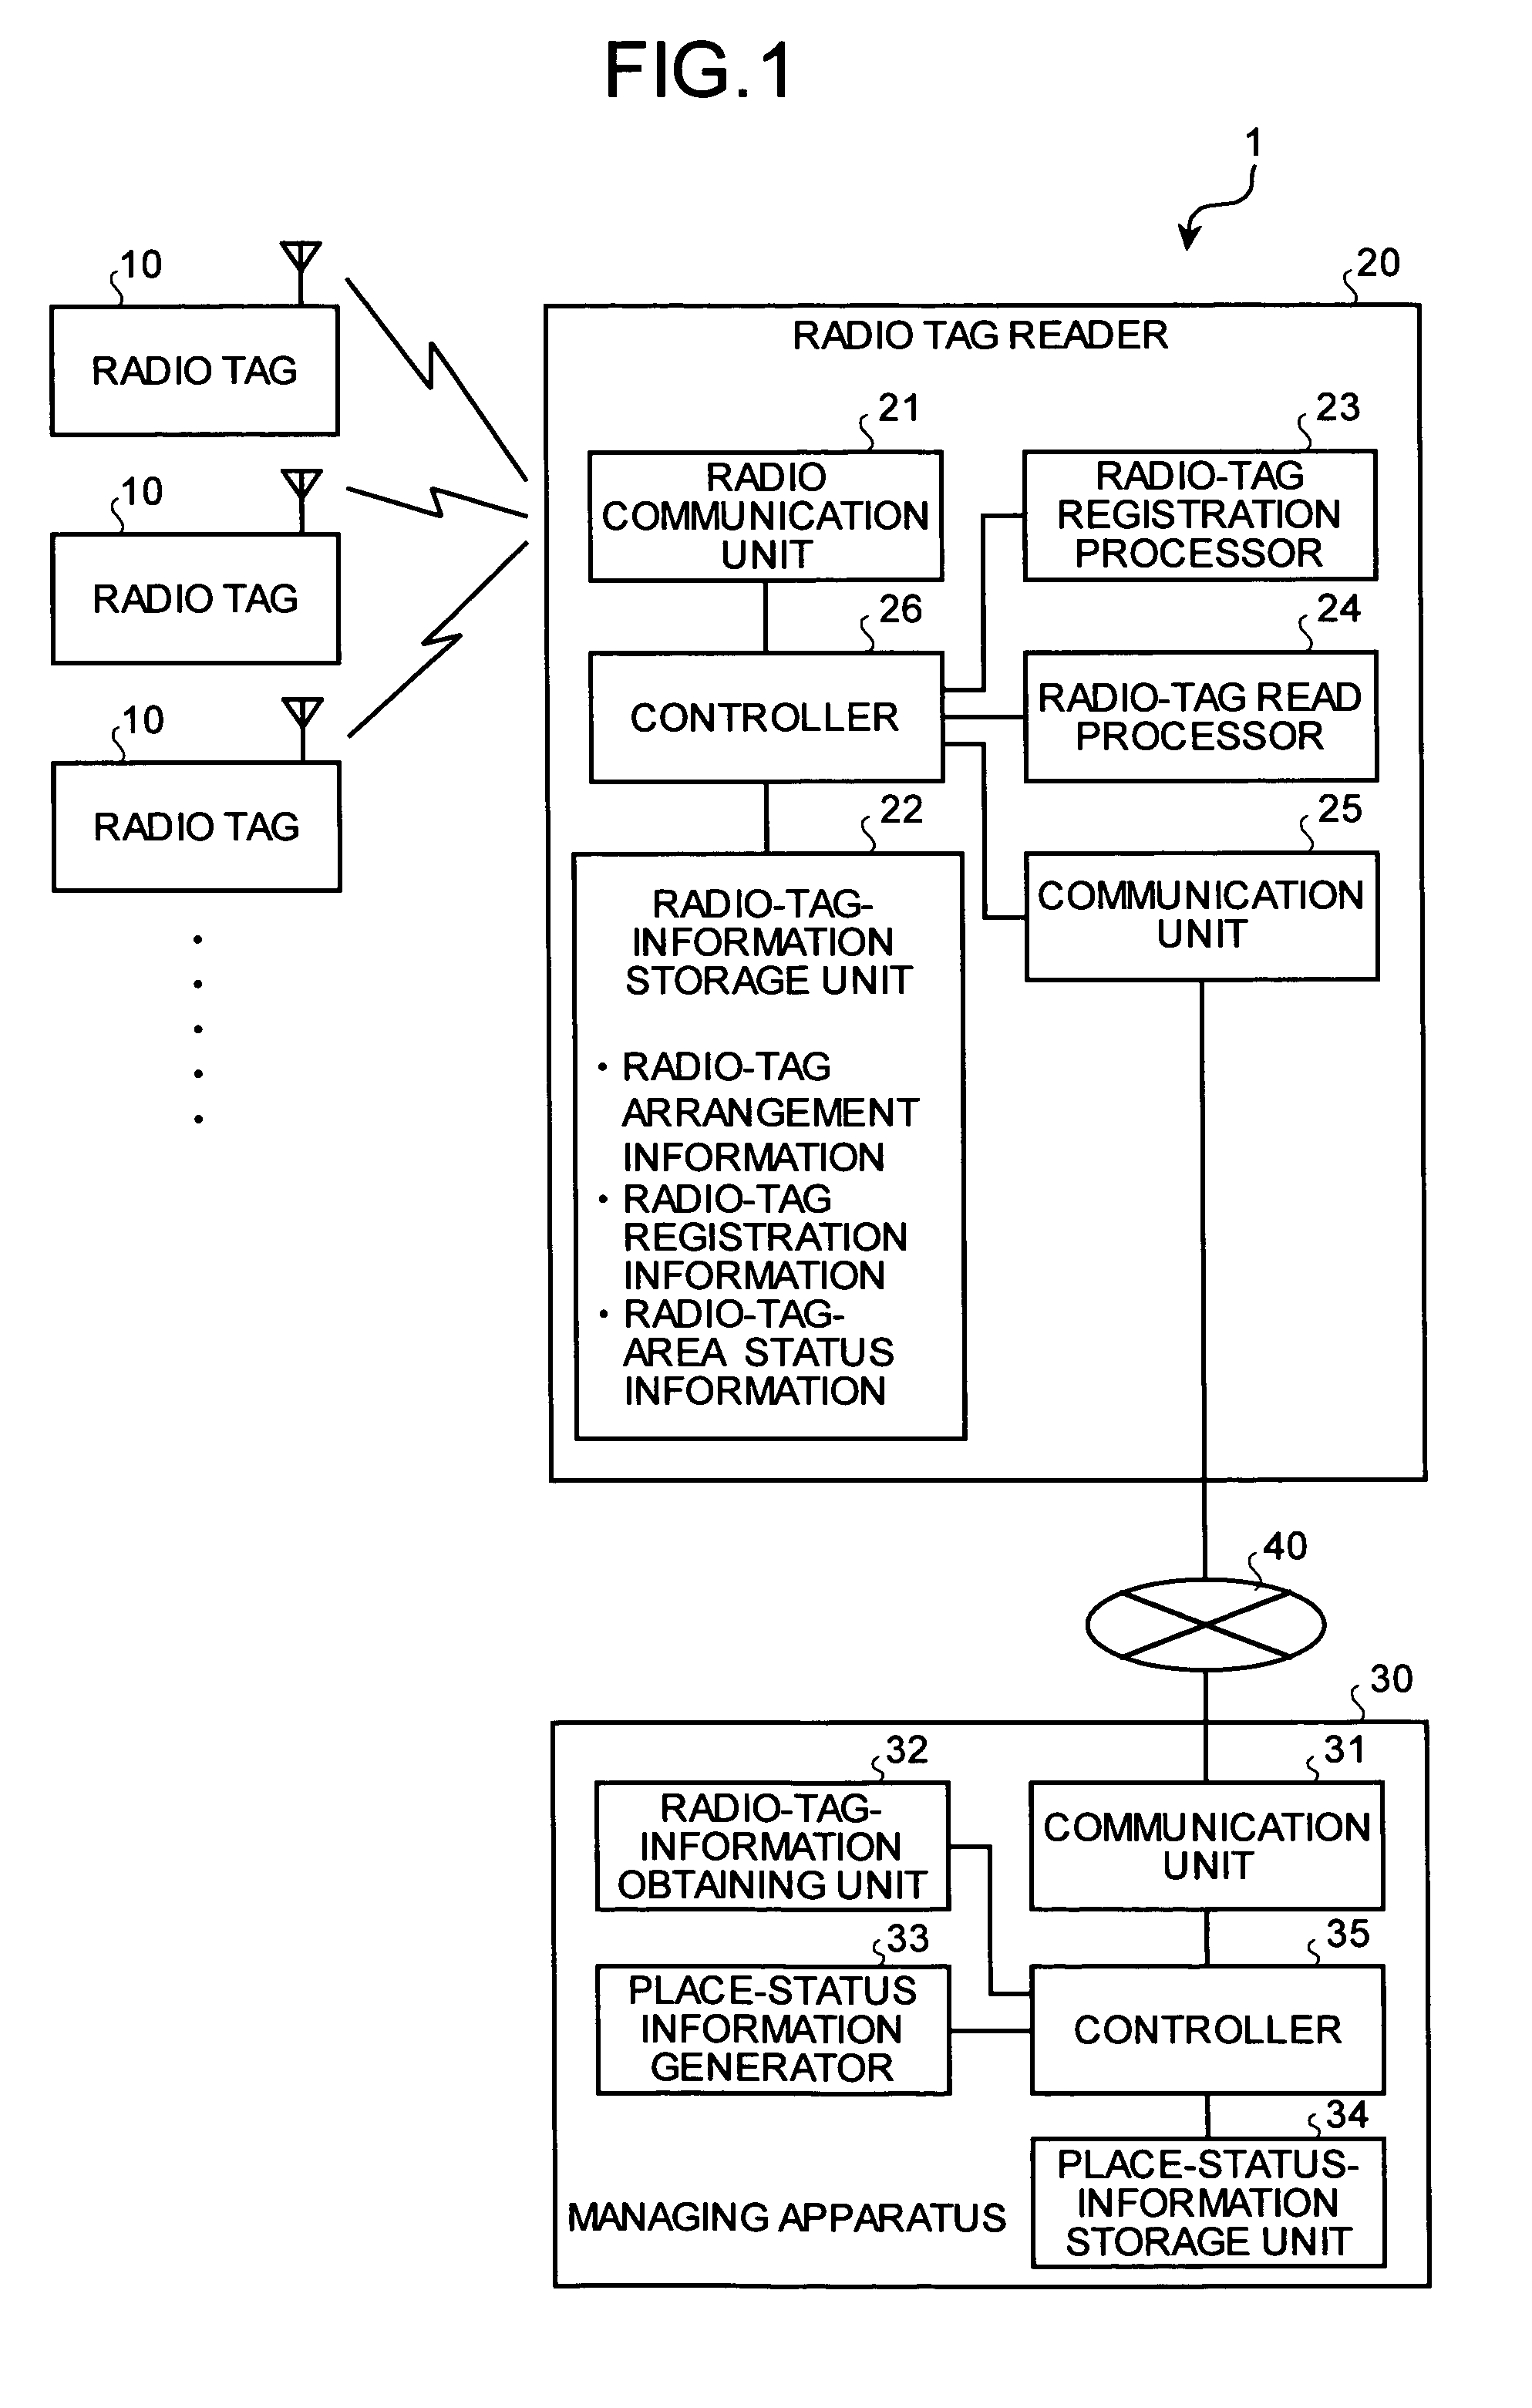 Place-status management system, radio tag reader, and managing apparatus